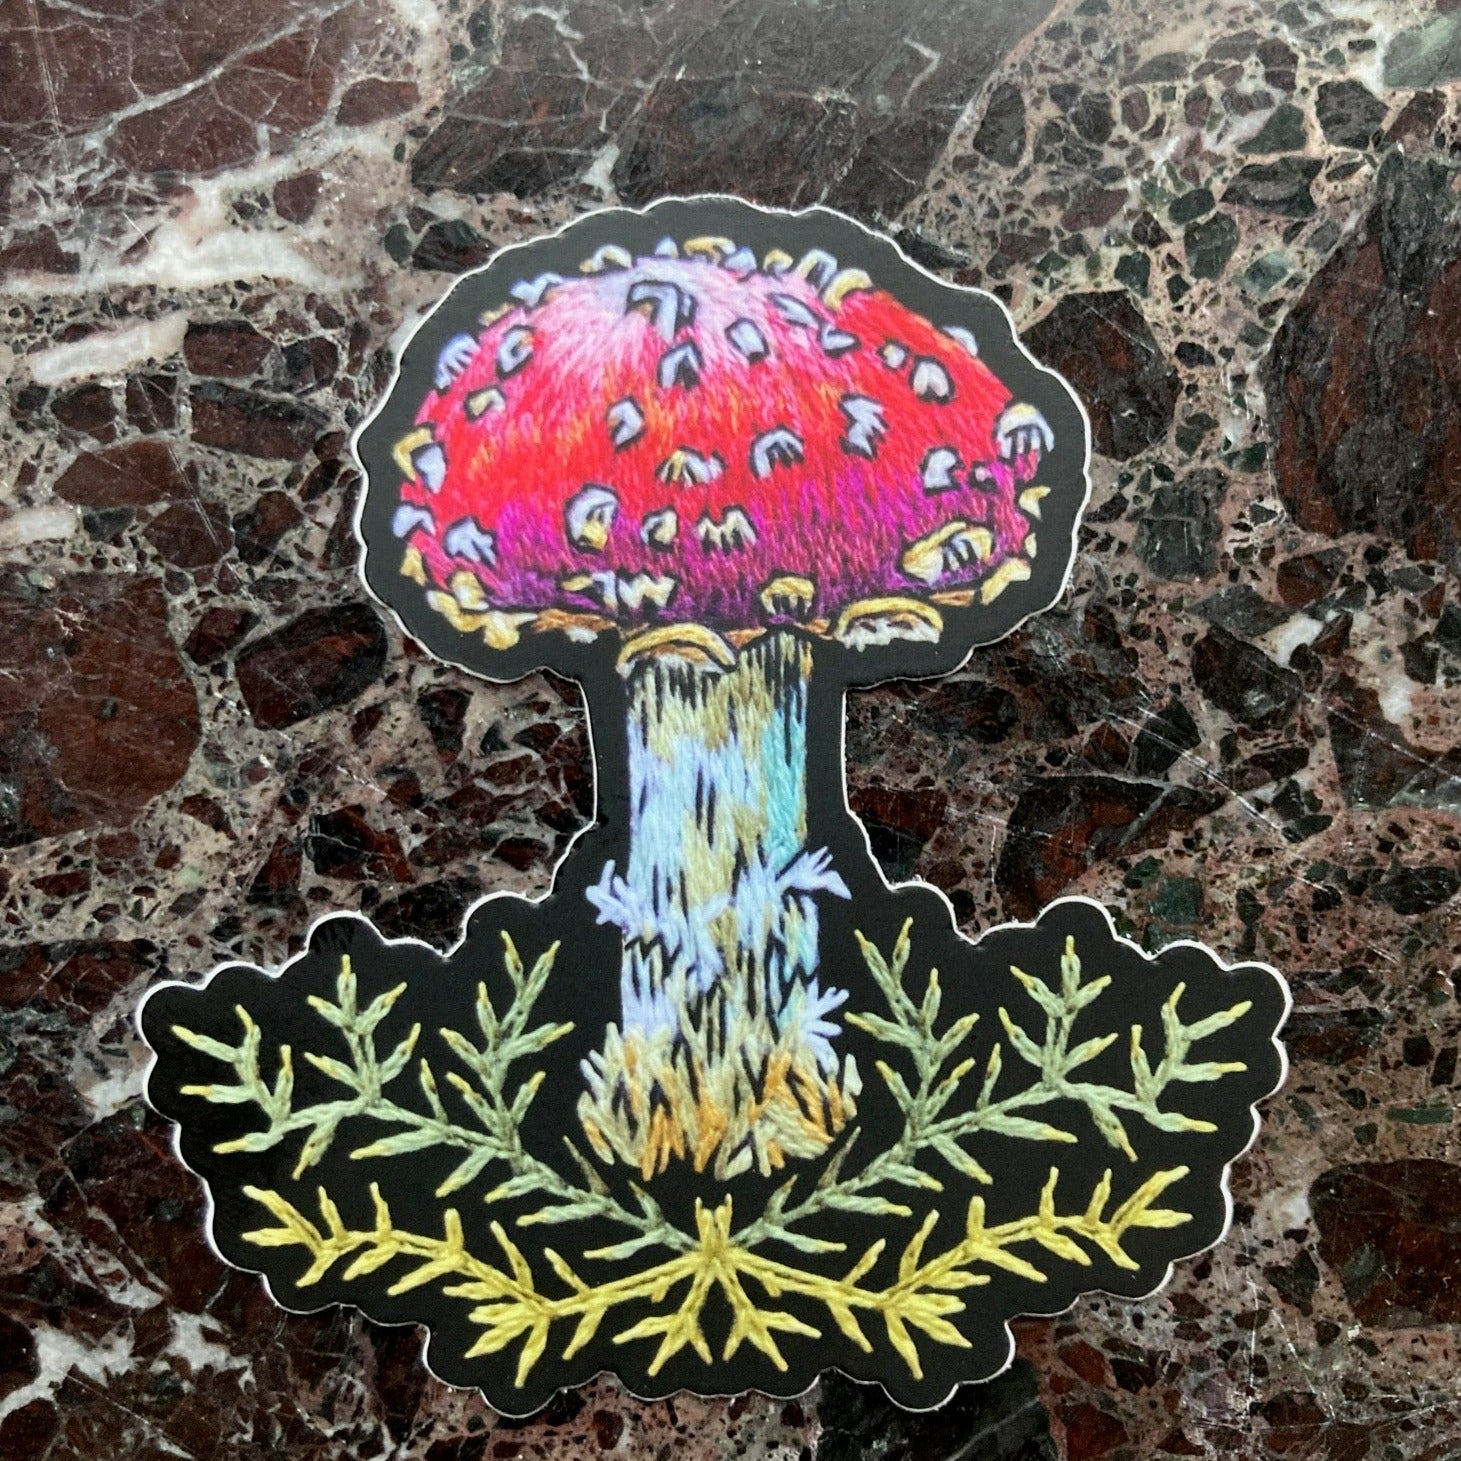 a single sticker depicting an embroidery of a mushroom with a red cap and white spots above some decorative stitched green moss sits on a dark marble surface.